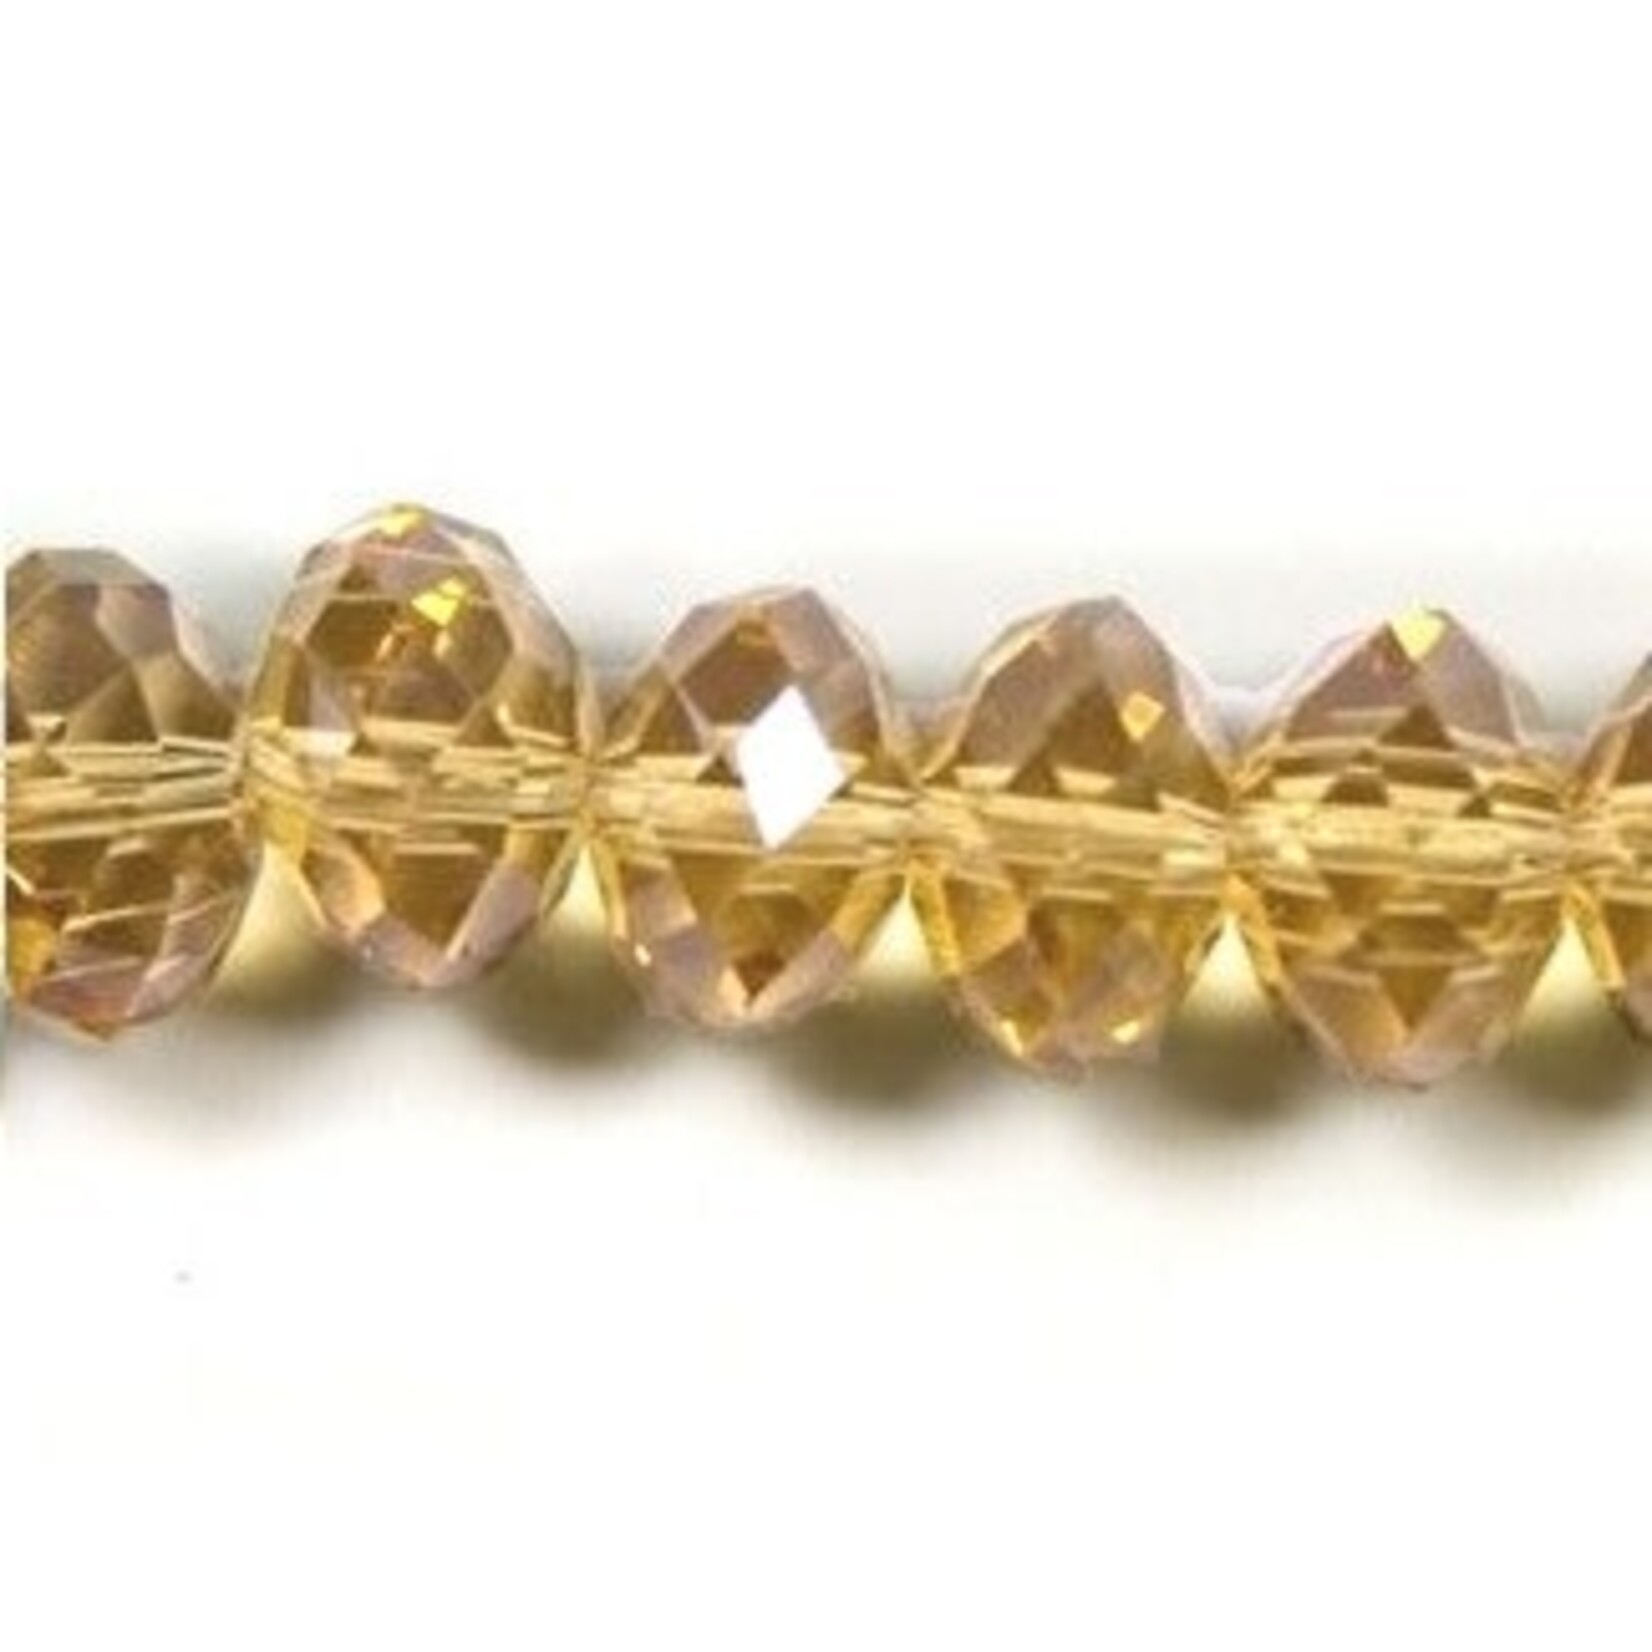 Faceted Glass Rondelle 10x12mm Golden Shadow Bead - 12 Pieces